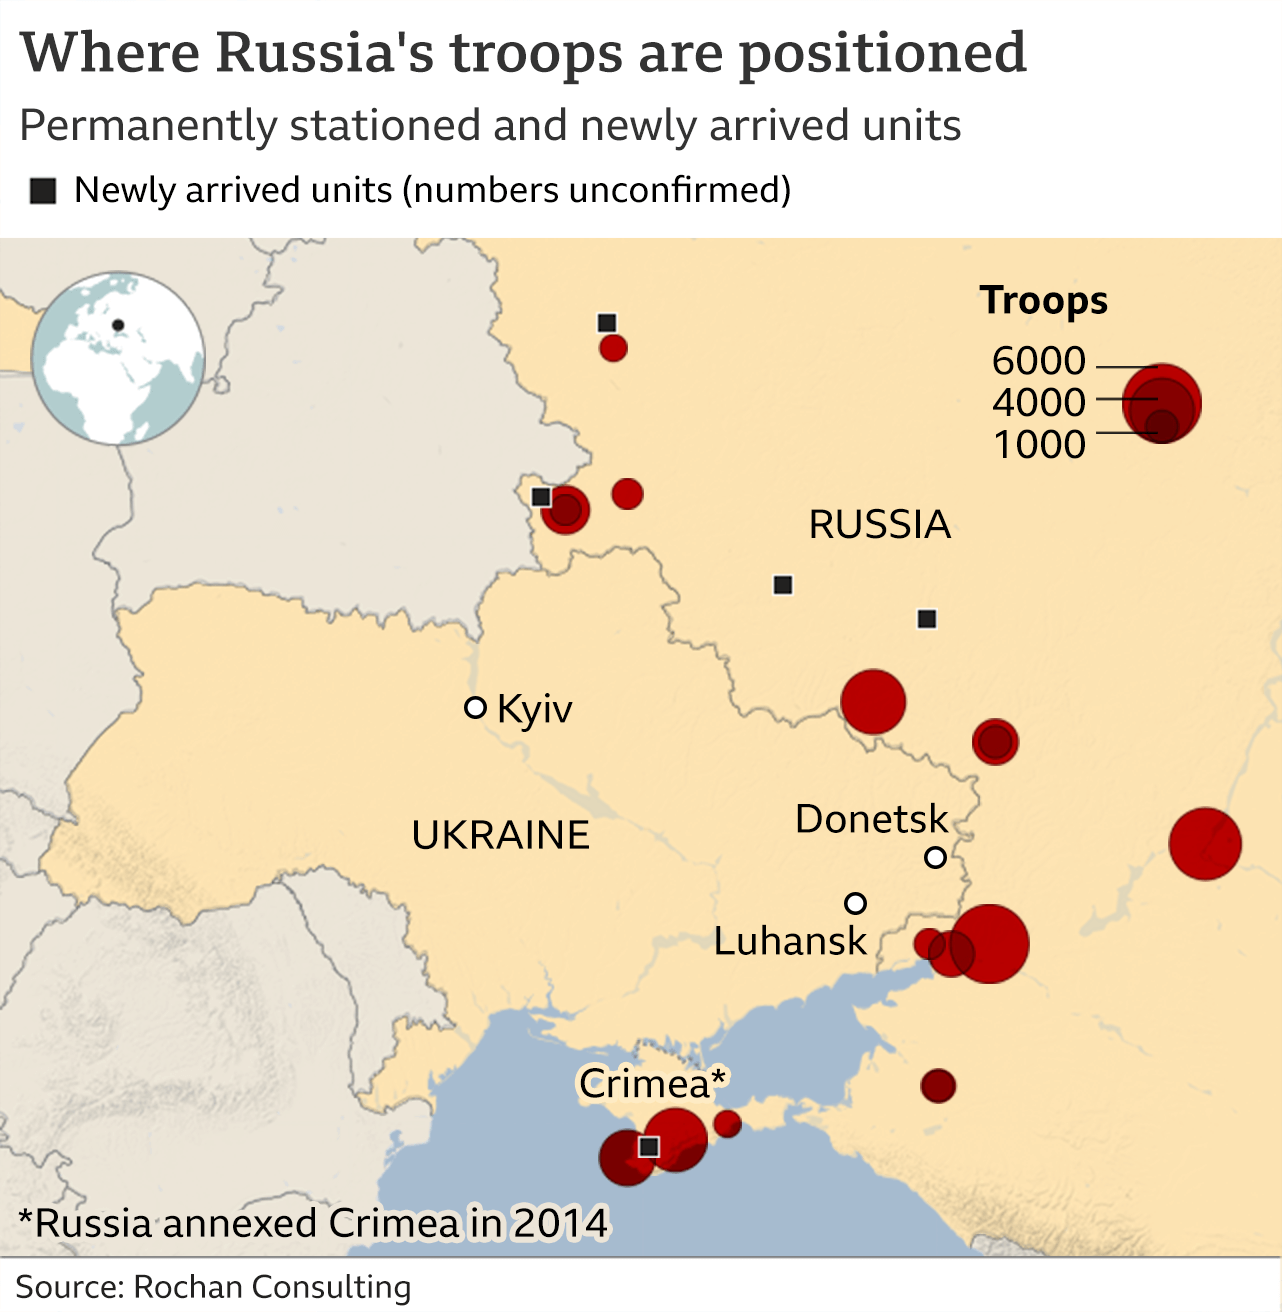 Map showing where Russia's troops are positioned along the border with Ukraine